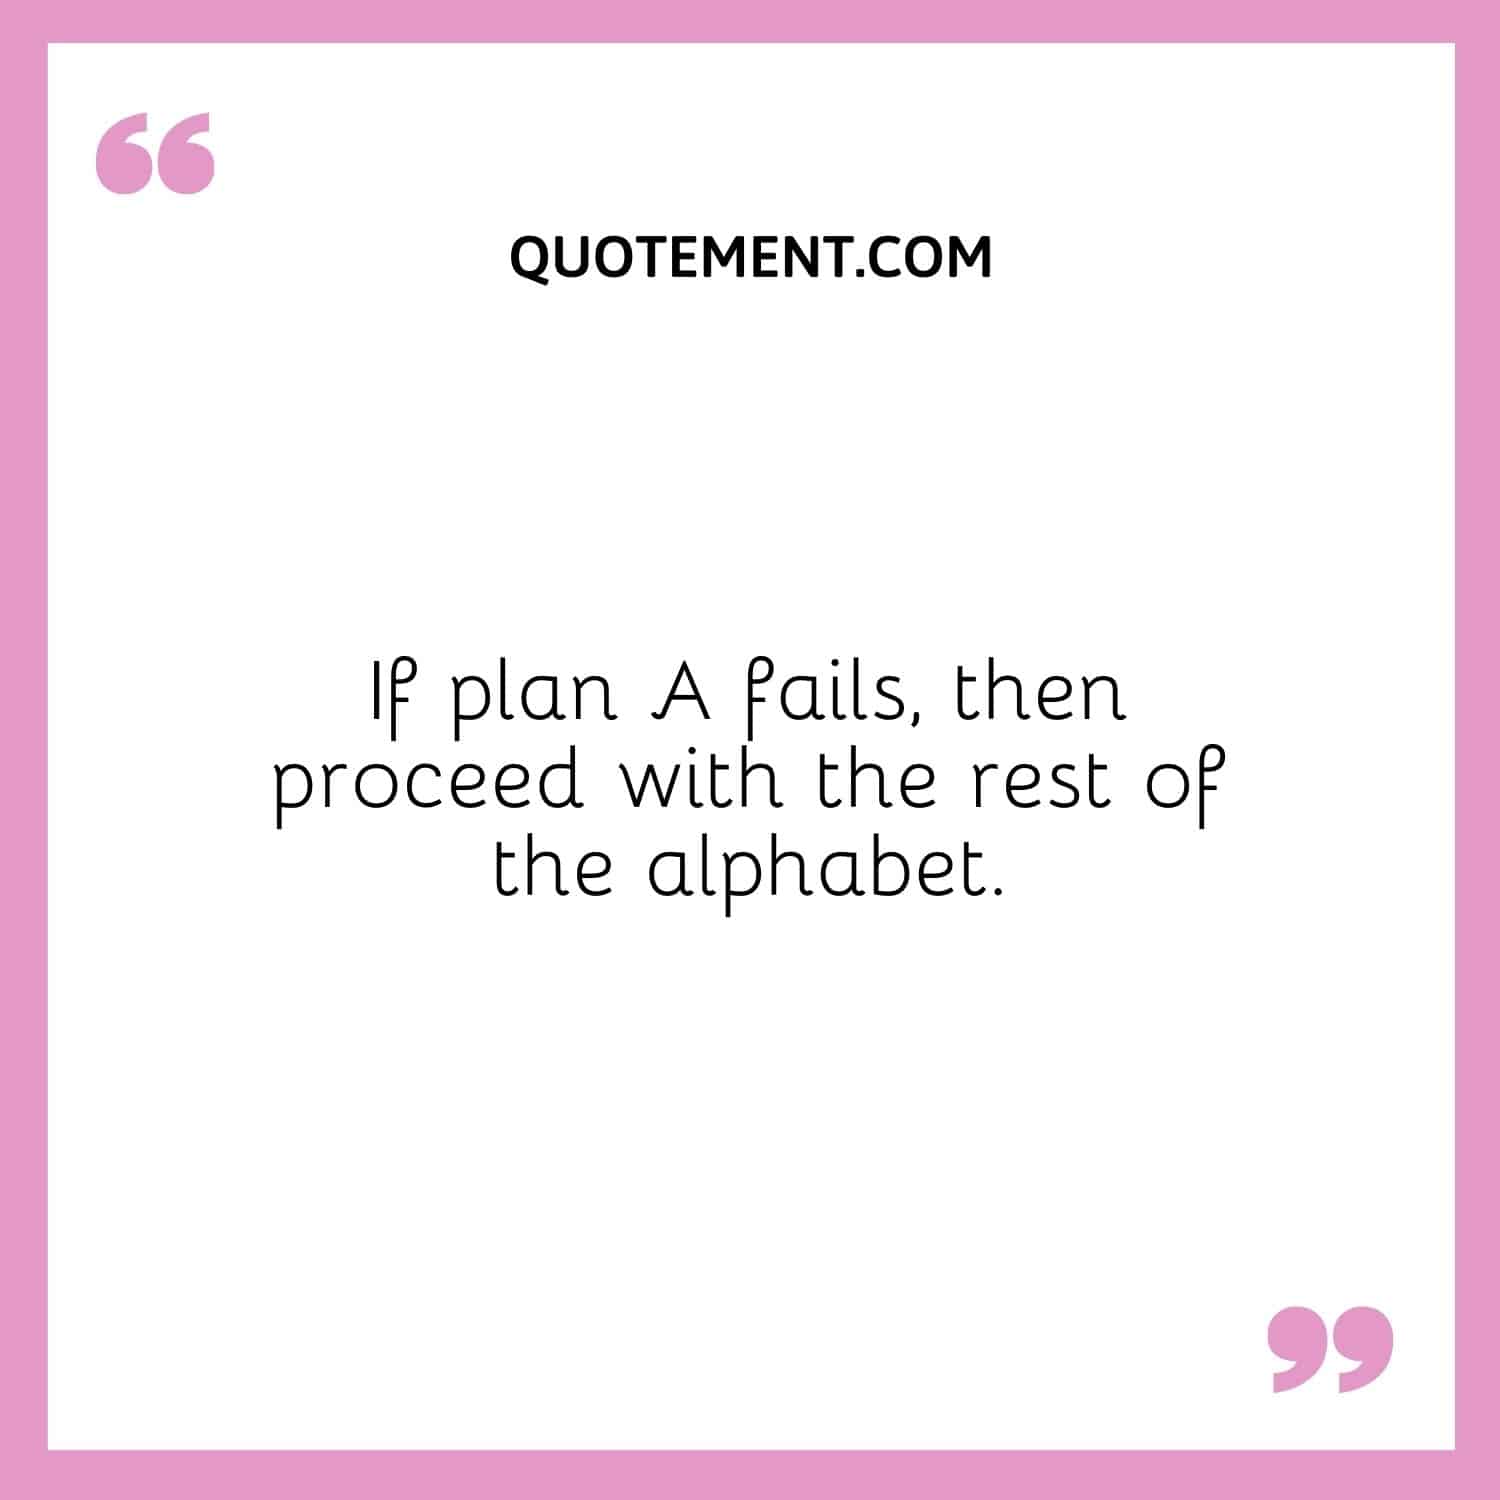 If plan A fails, then proceed with the rest of the alphabet.